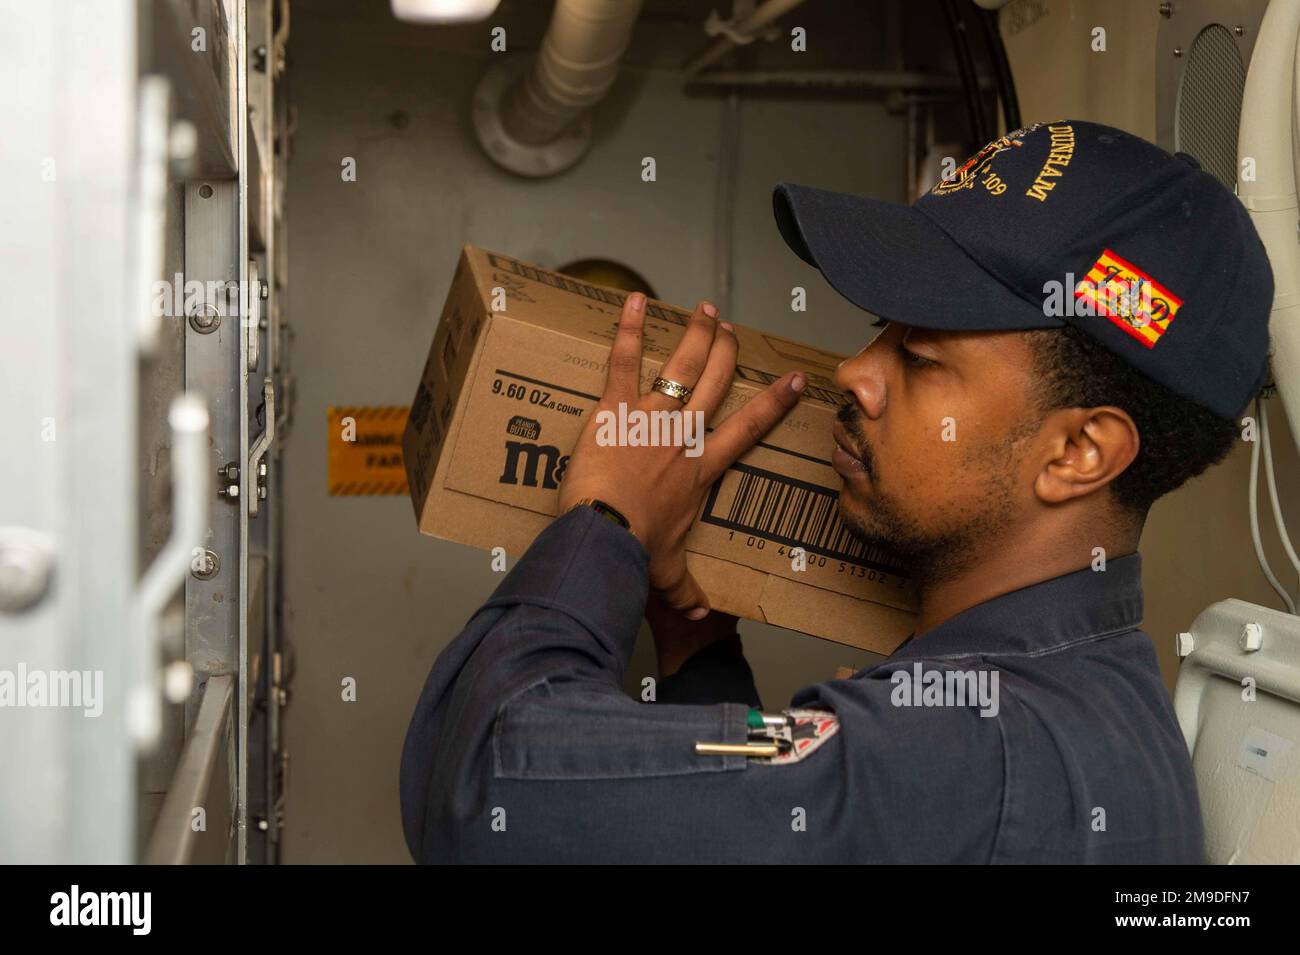 220517-N-UP745-1347 TYRRHENIAN SEA (May 17, 2022) Retail Services Specialist 3rd Class Abel Zewde, from New York, stores stock in a bulk storeroom aboard the Arleigh Burke-class guided-missile destroyer USS Jason Dunham (DDG 109) in the Tyrrhenian Sea, May 17, 2022. Jason Dunham is on a scheduled deployment in the U.S. Naval Forces Europe area of operations, employed by U.S. Sixth Fleet to defend U.S., Allied and Partner interest. Stock Photo